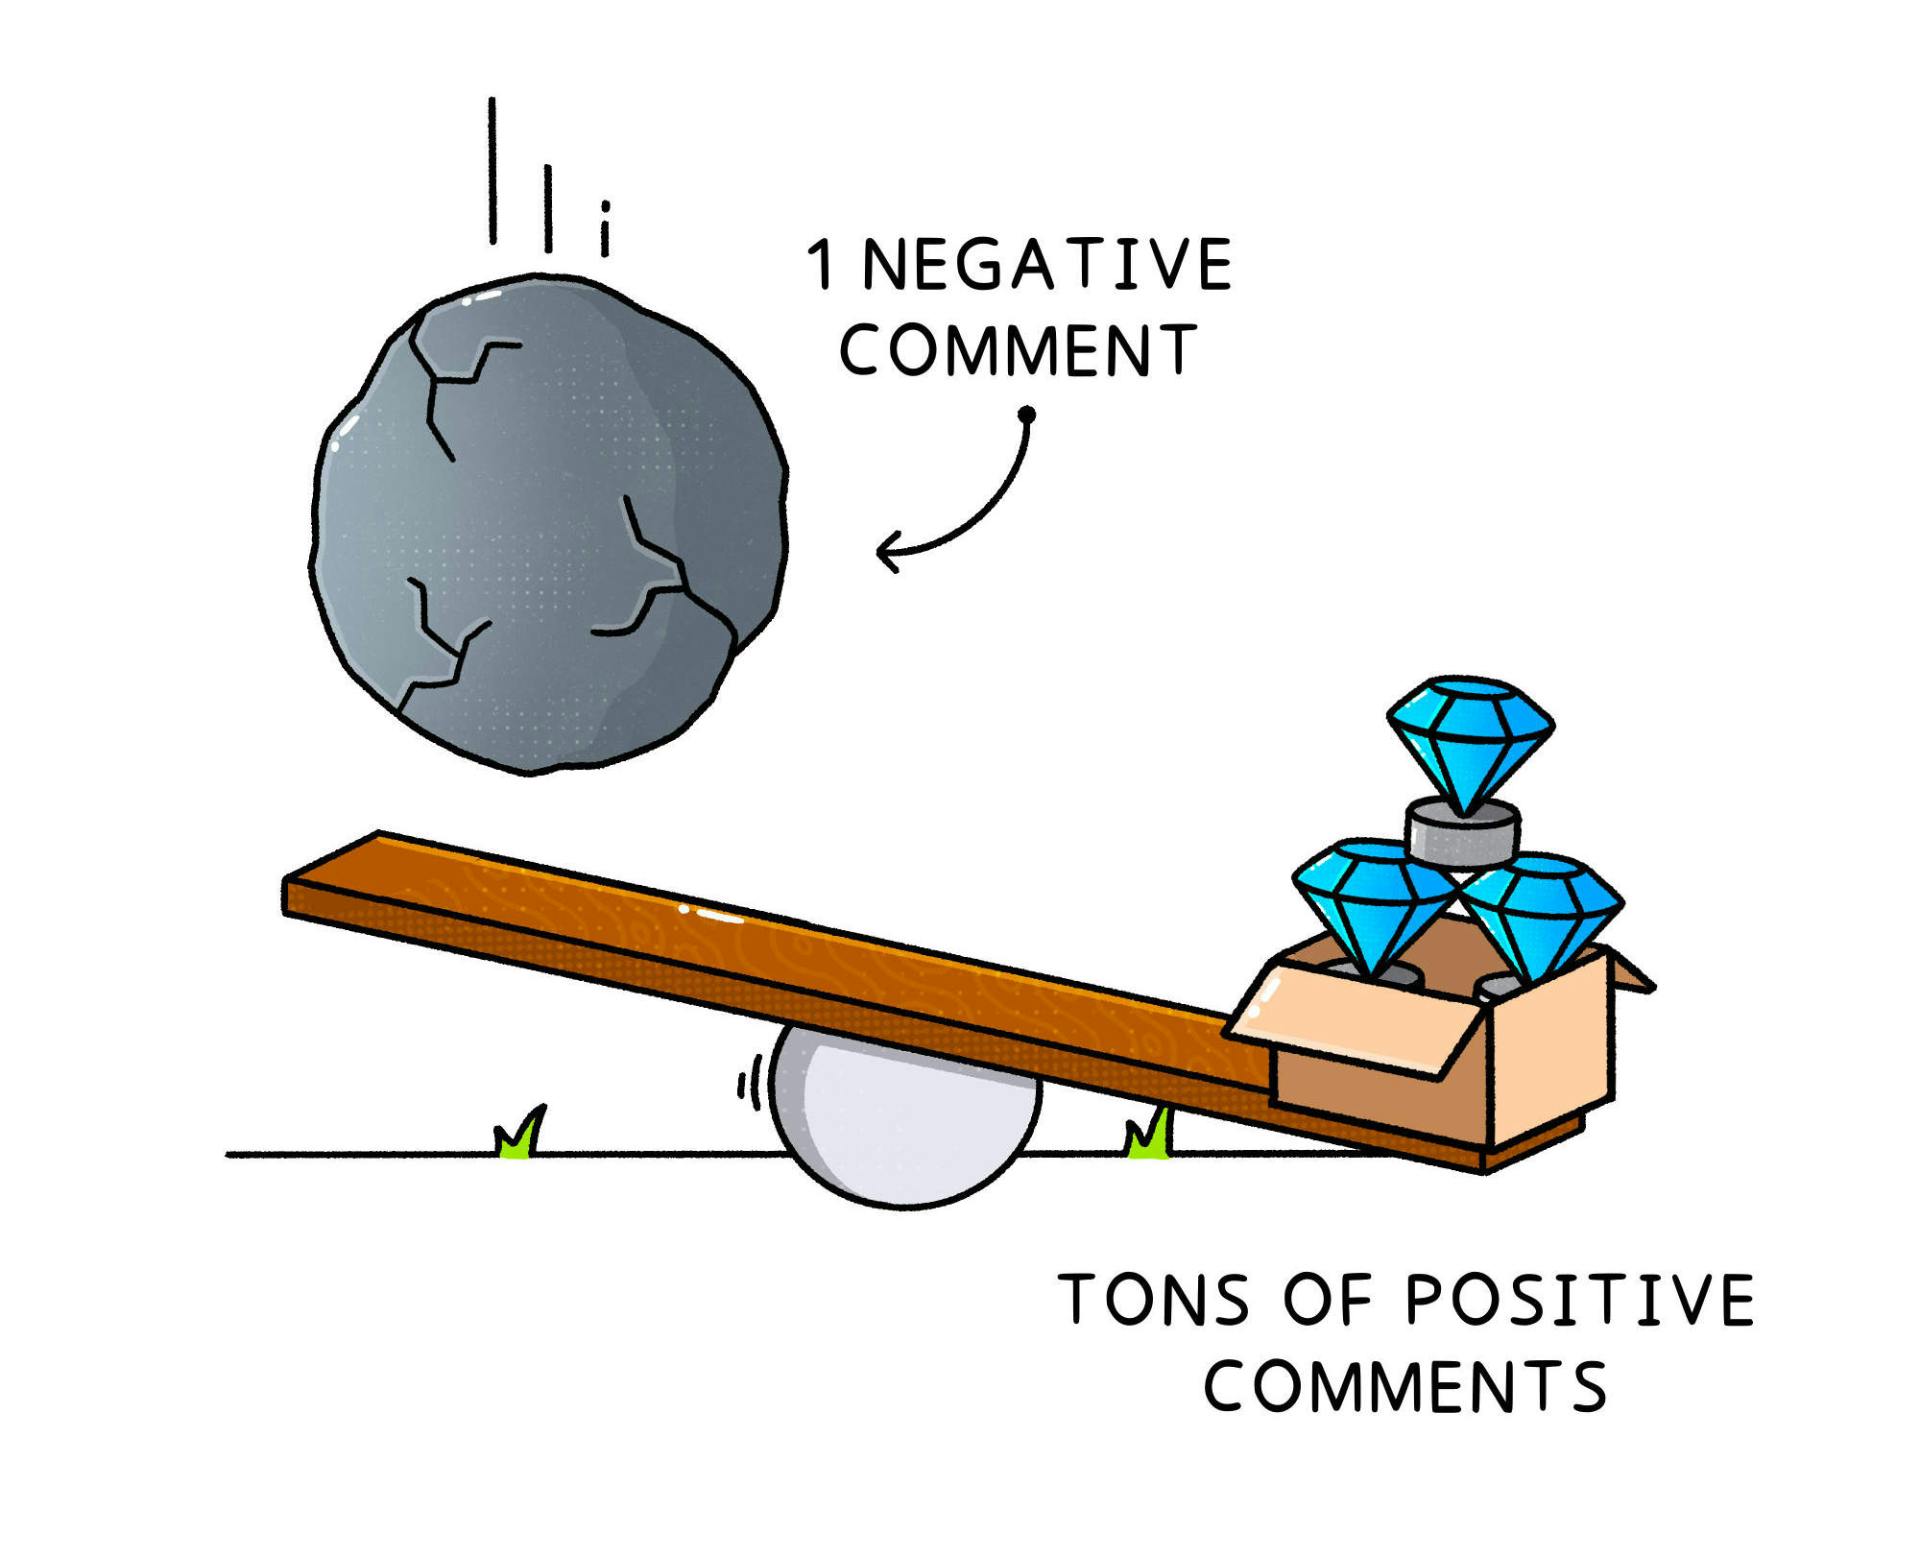 Tons of positive comments outweighs one negative comment, with illustration